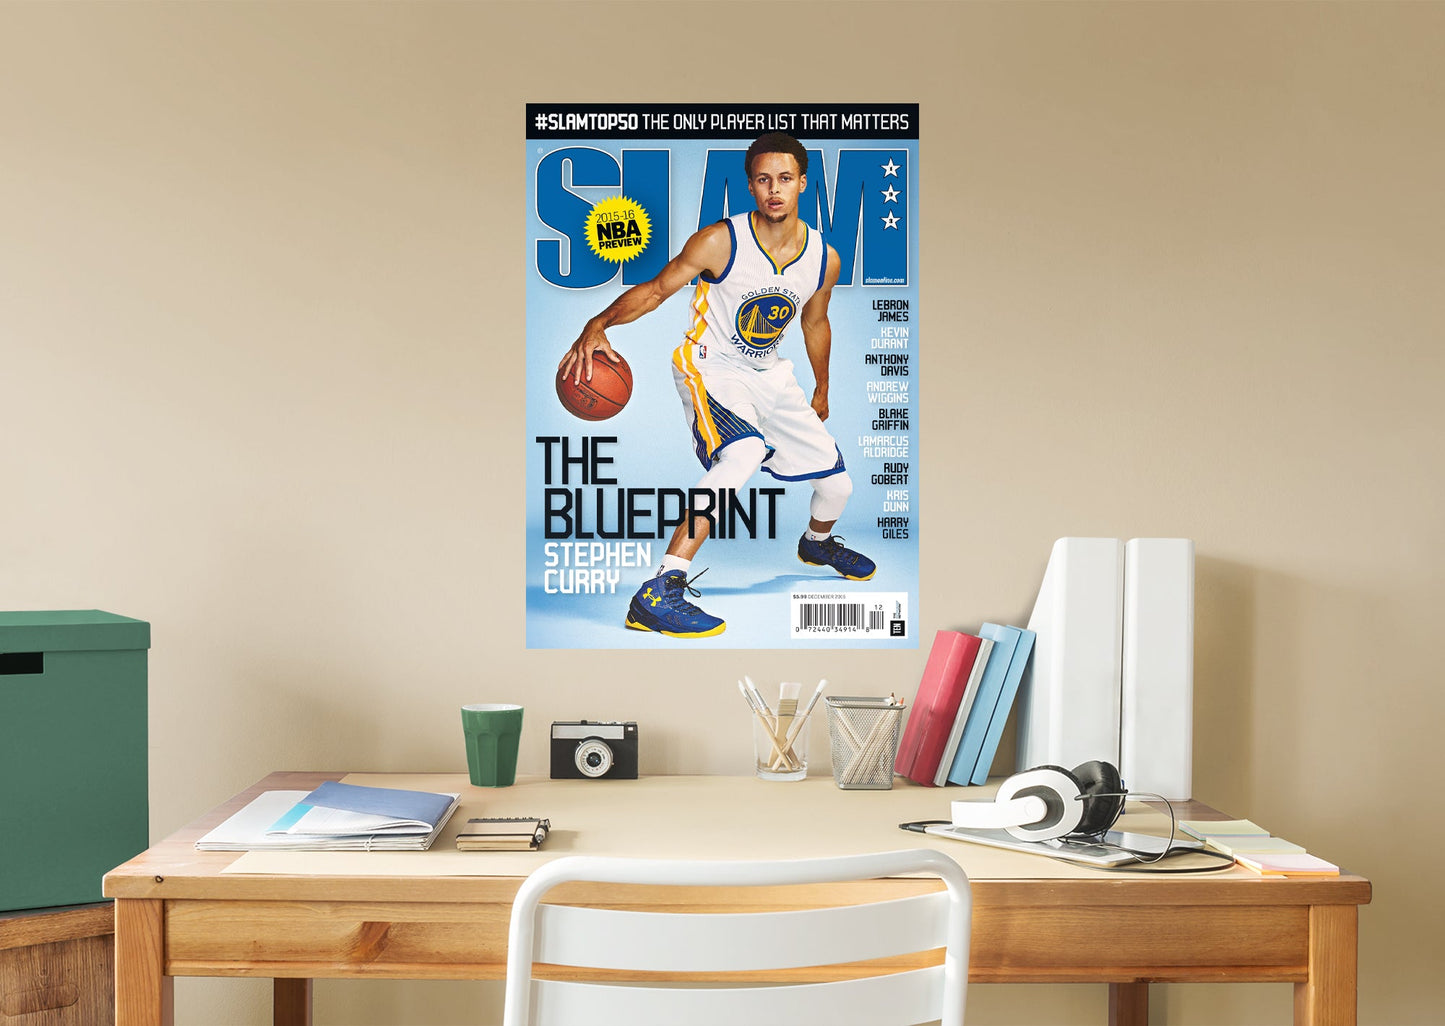 Golden State Warriors: Stephen Curry SLAM Magazine 193 Cover Mural - Officially Licensed NBA Removable Adhesive Decal